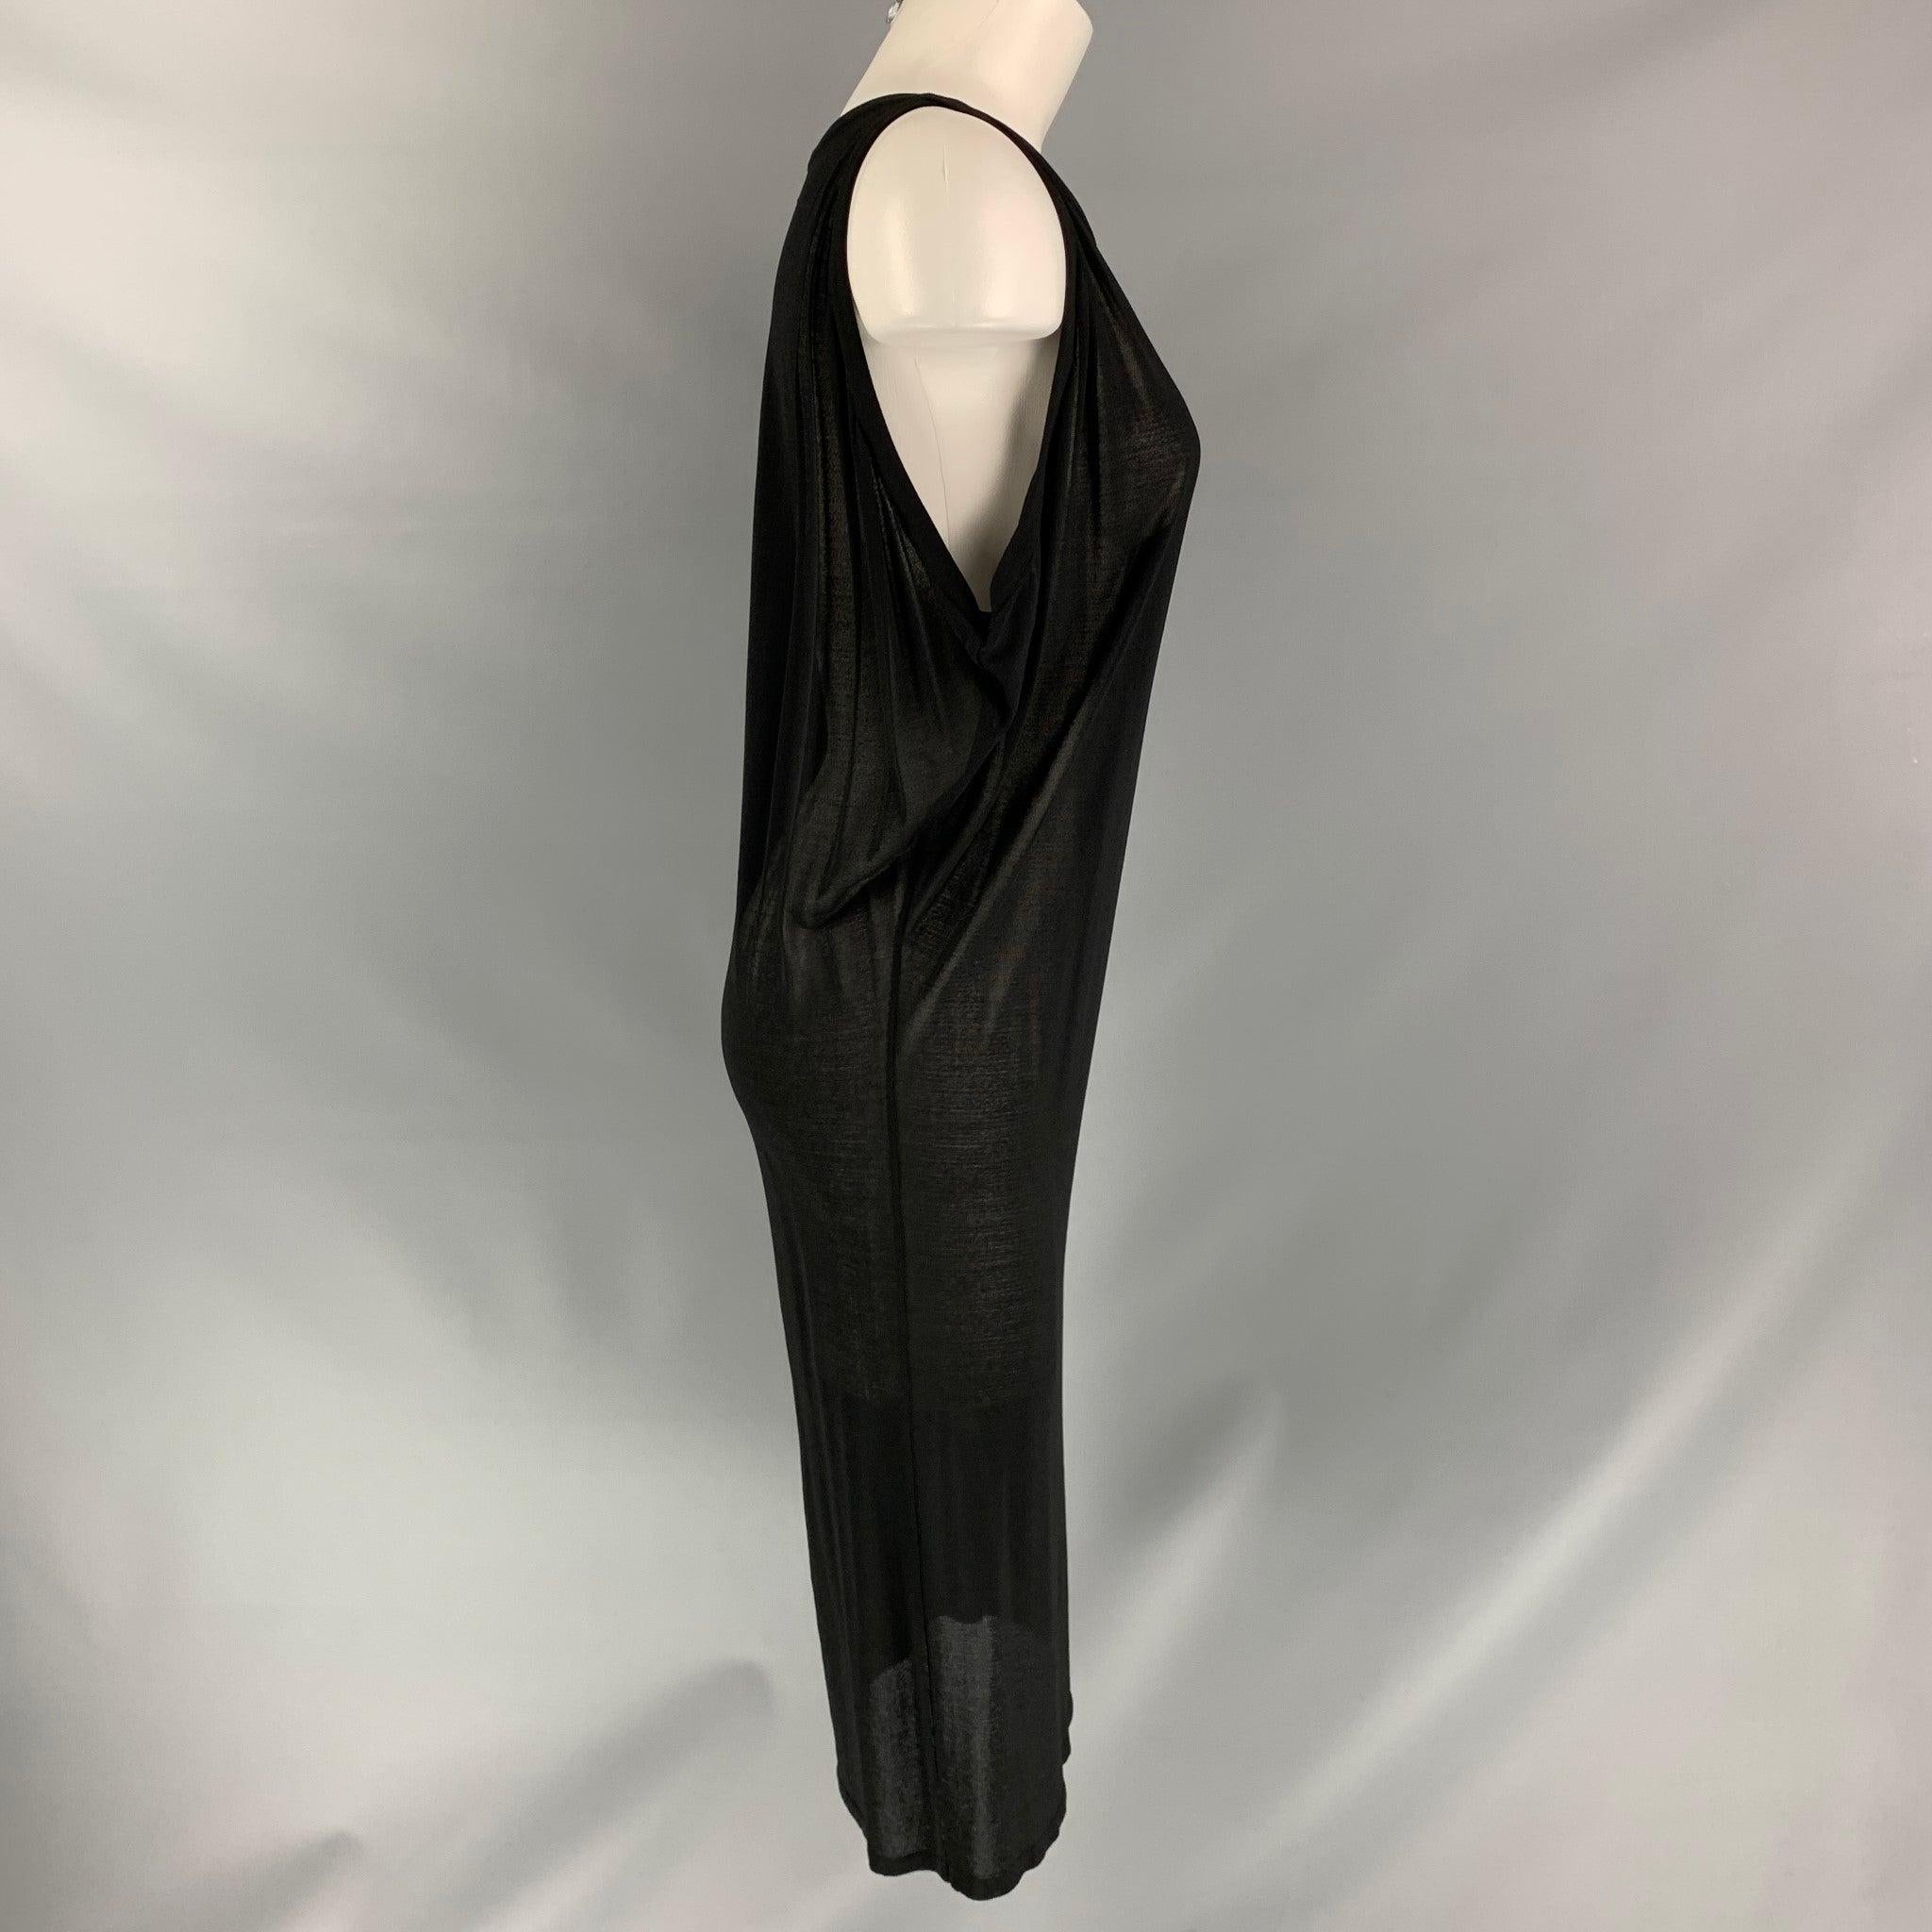 GIAMBATTISTA VALLI
 below knee dress comes in black viscose blend featuring a see through aesthetic. Made in Italy.
Excellent Good Pre-Owned Condition.  

Marked:   42 

Measurements: 
 
Shoulder: 11.5 inBust: 30 inWaist: 36 inHip: 40 in Length: 42